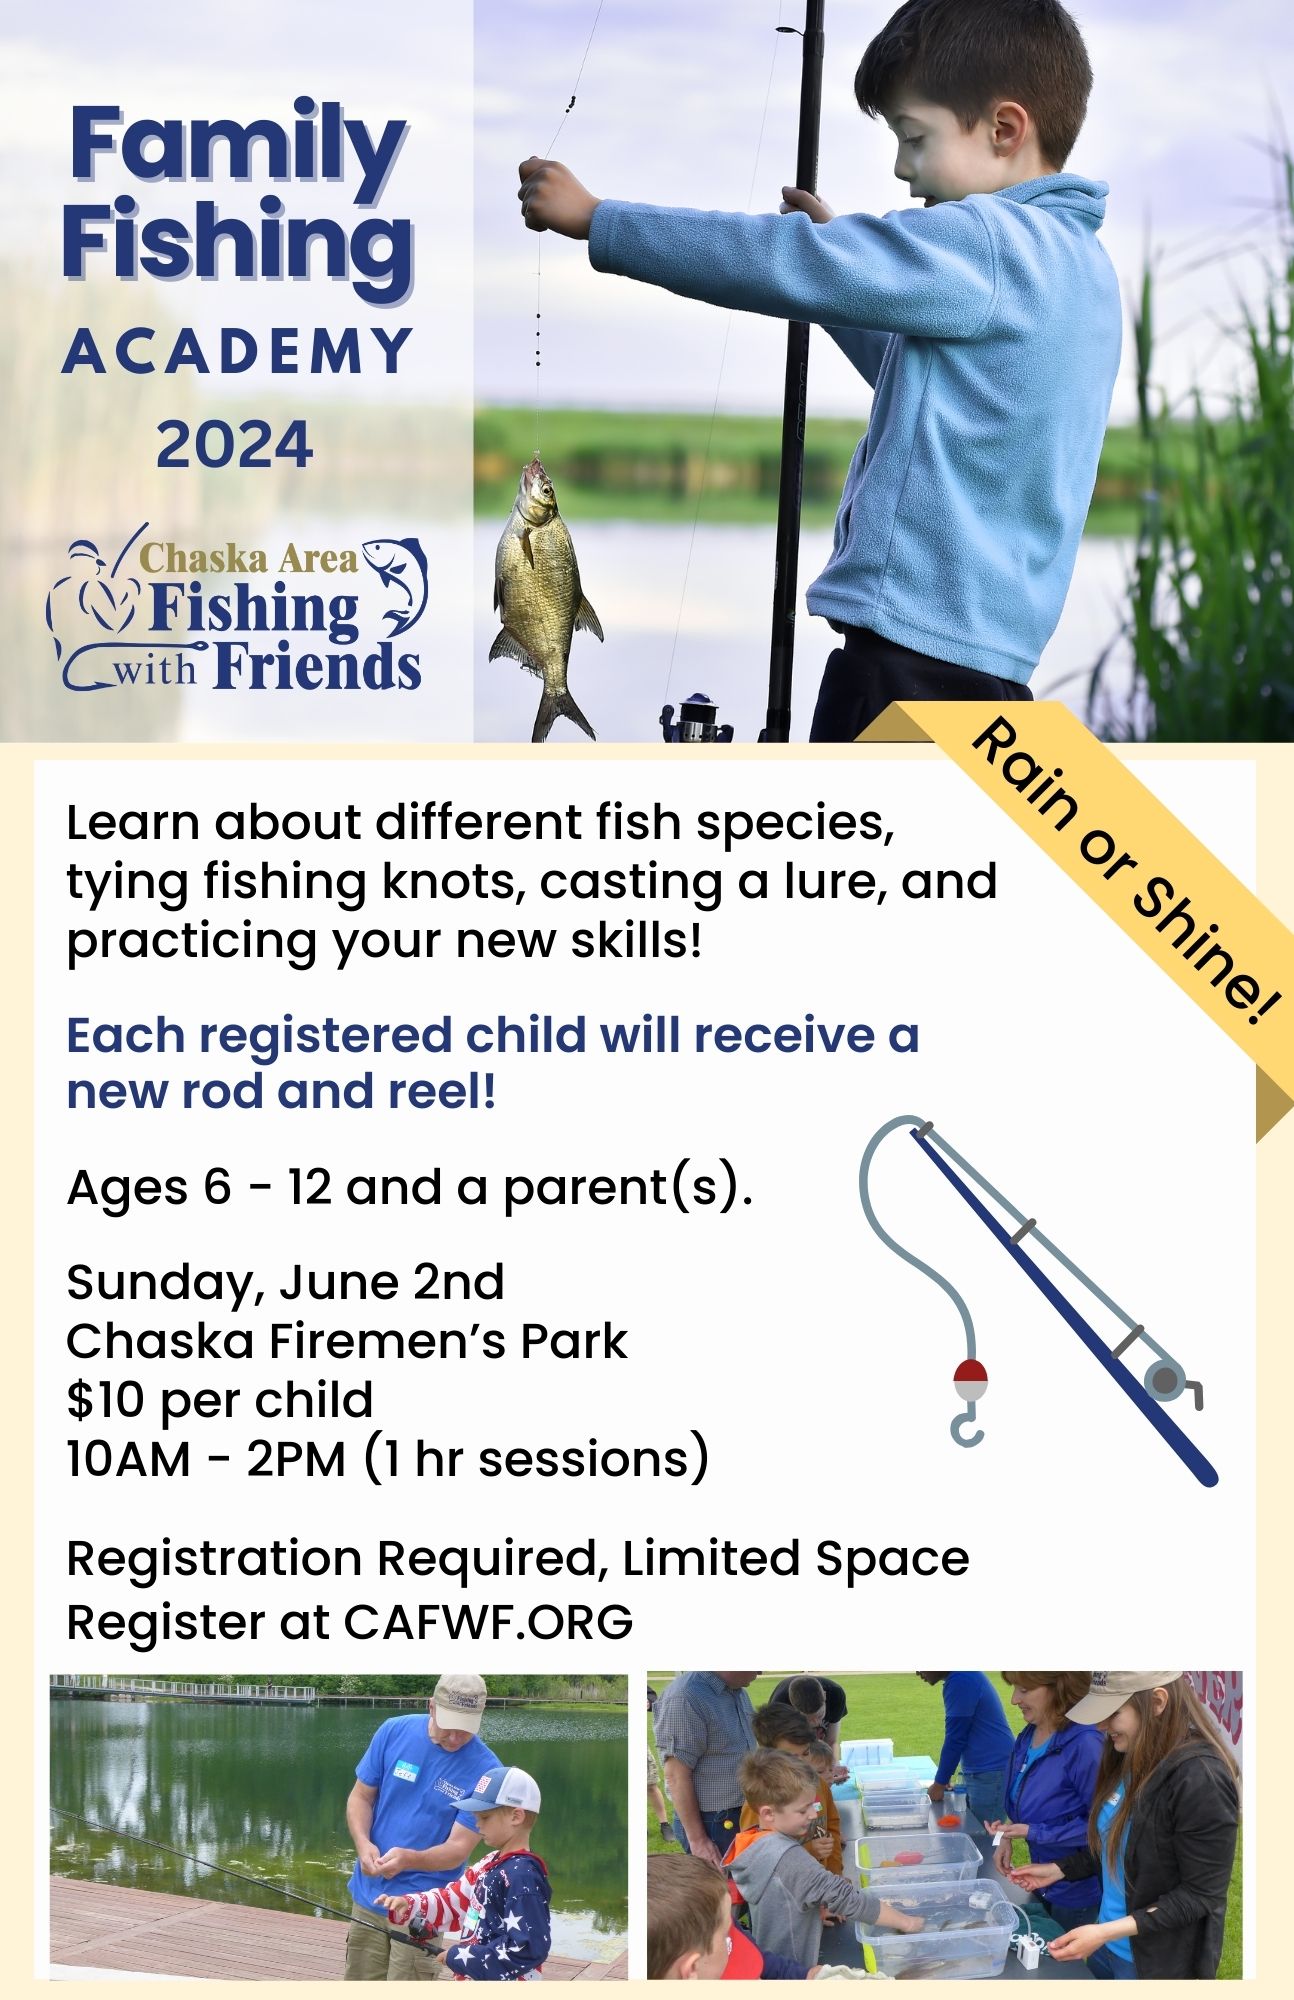 Family Fishing Academy - Chaska Area Fishing With Friends